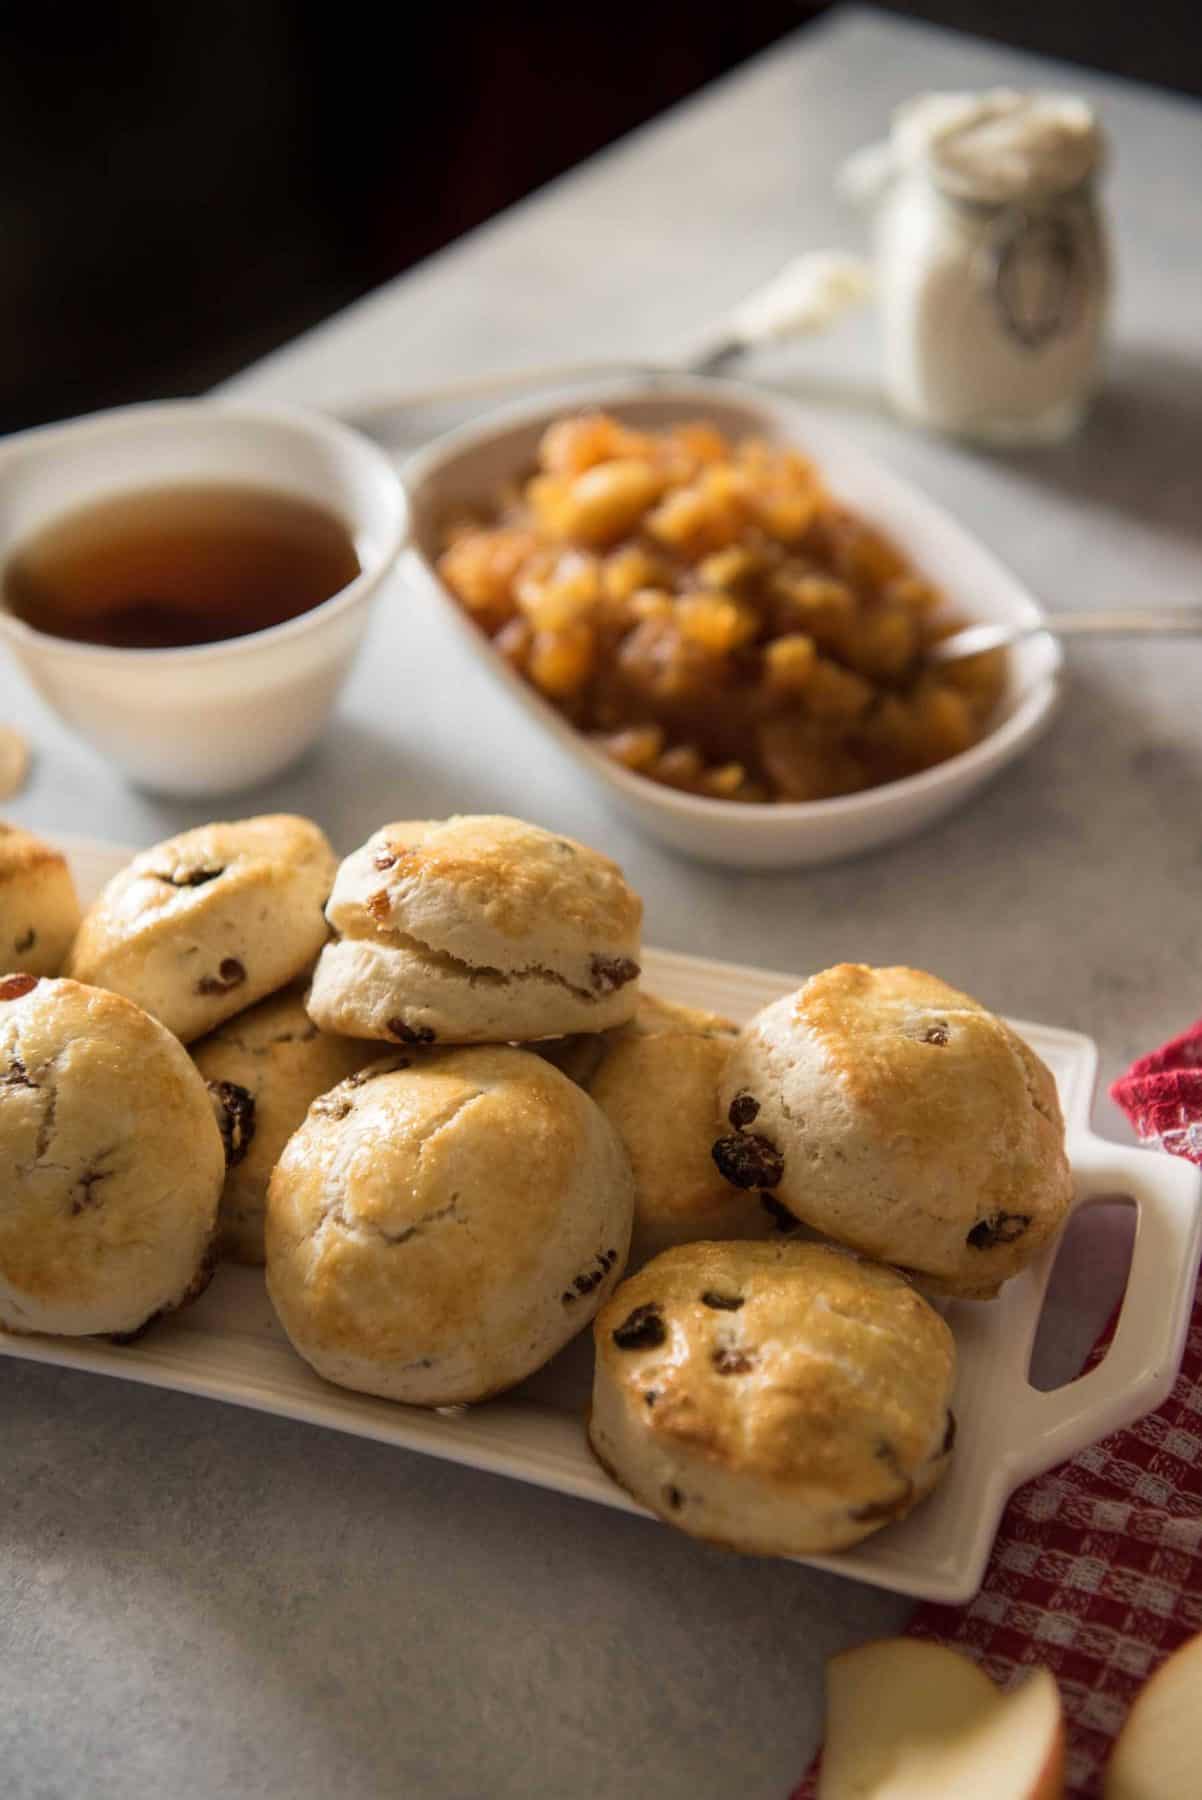 Perfect for brunch or as part of your afternoon tea time, these English Raisin Scones with Apple Jam are slightly sweet, fluffy, unique version of the popular British pastry.